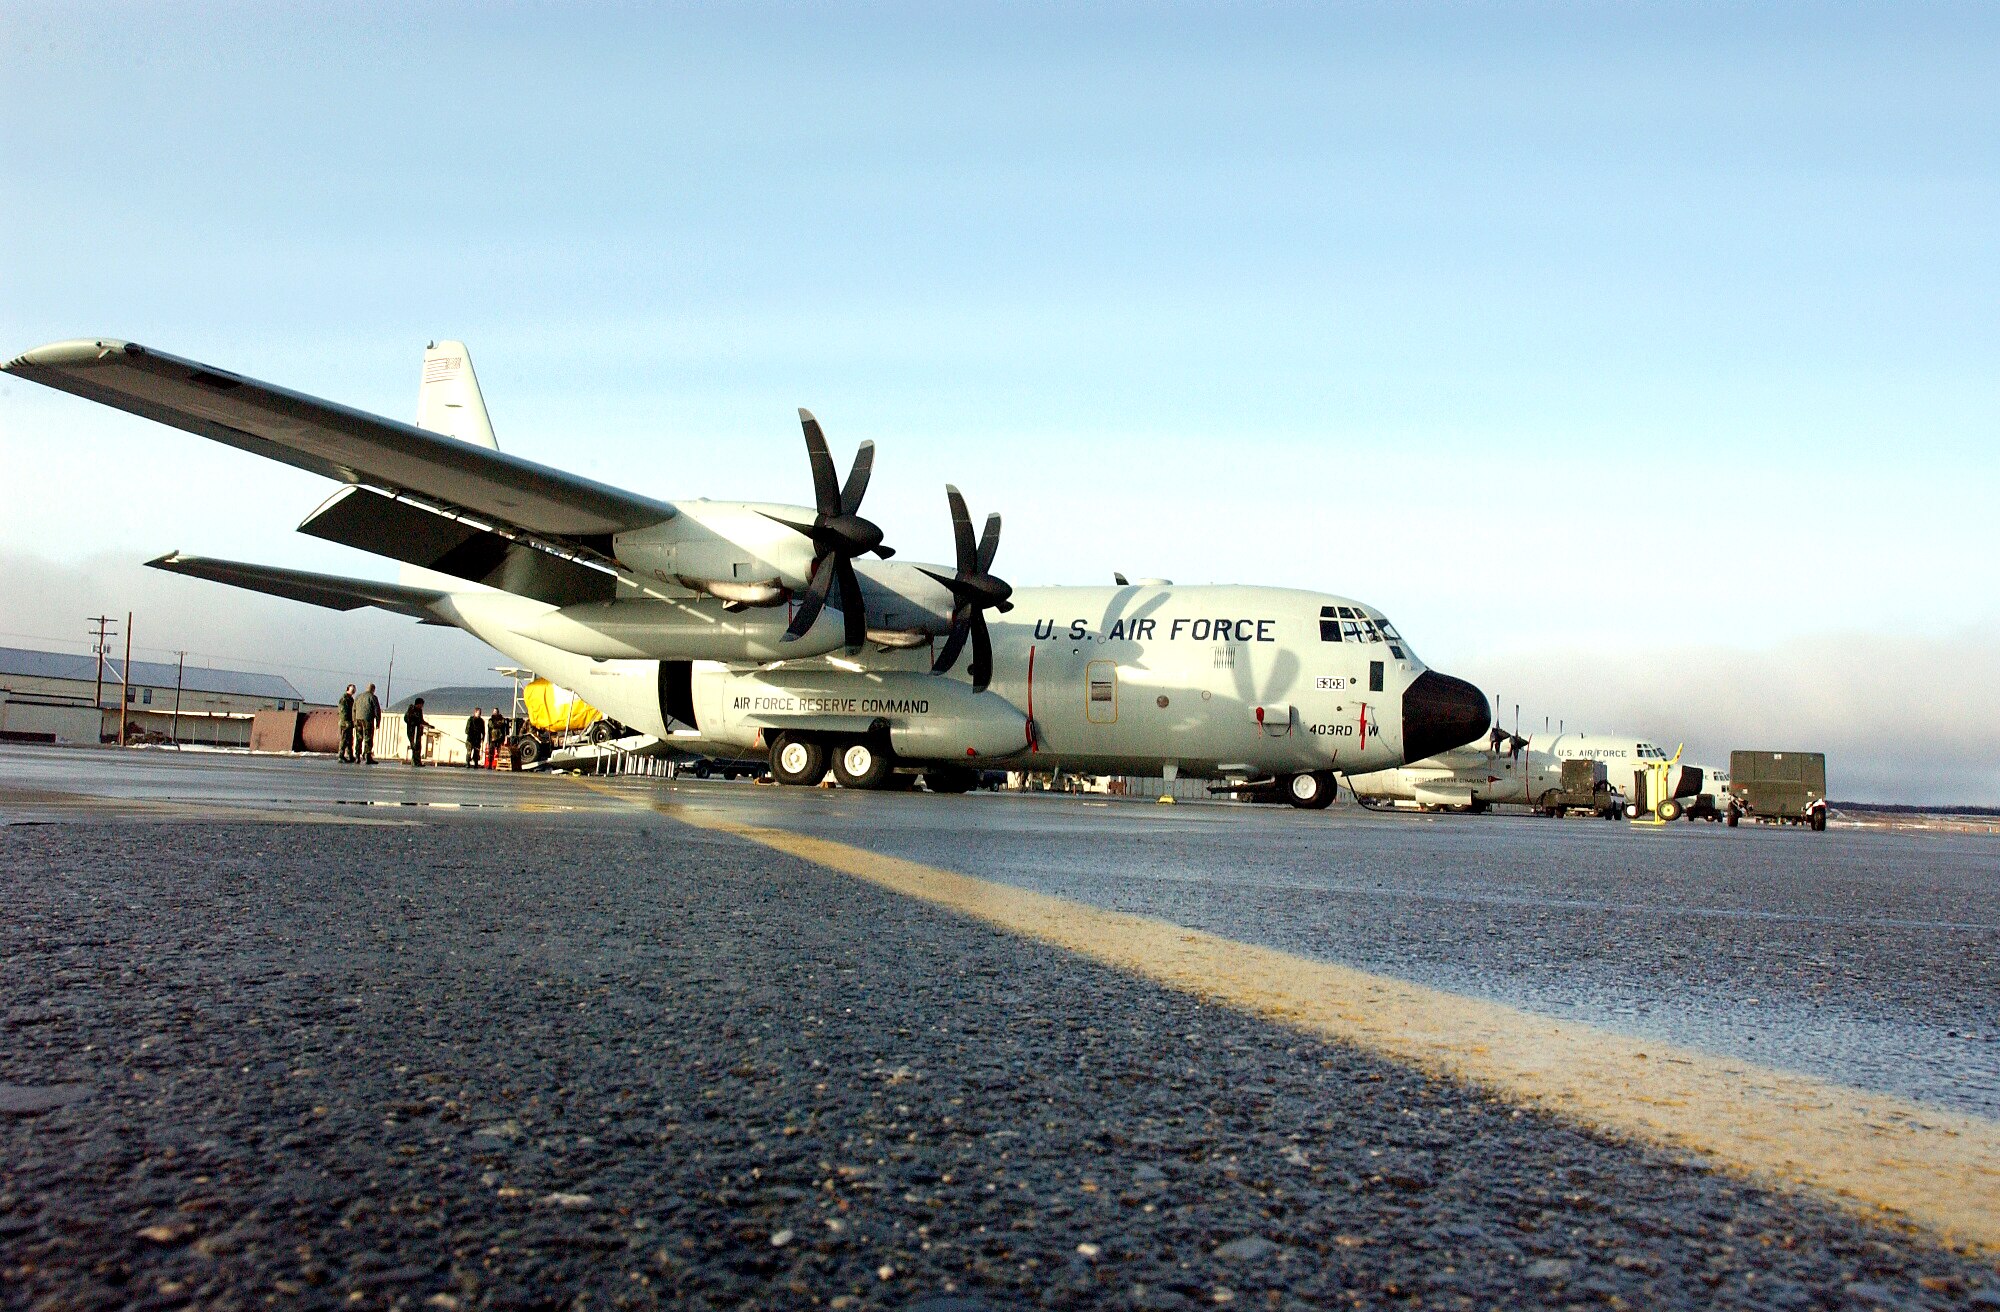 The "Hurricane Hunters" from Keesler Air Force Base, Miss., flew their first operational mission into a storm in a new WC-130J Hercules on May 20, 2005, gathering data about Hurricane Adrian off the coast of El Salvador. (U.S. Air Force file photo) 
